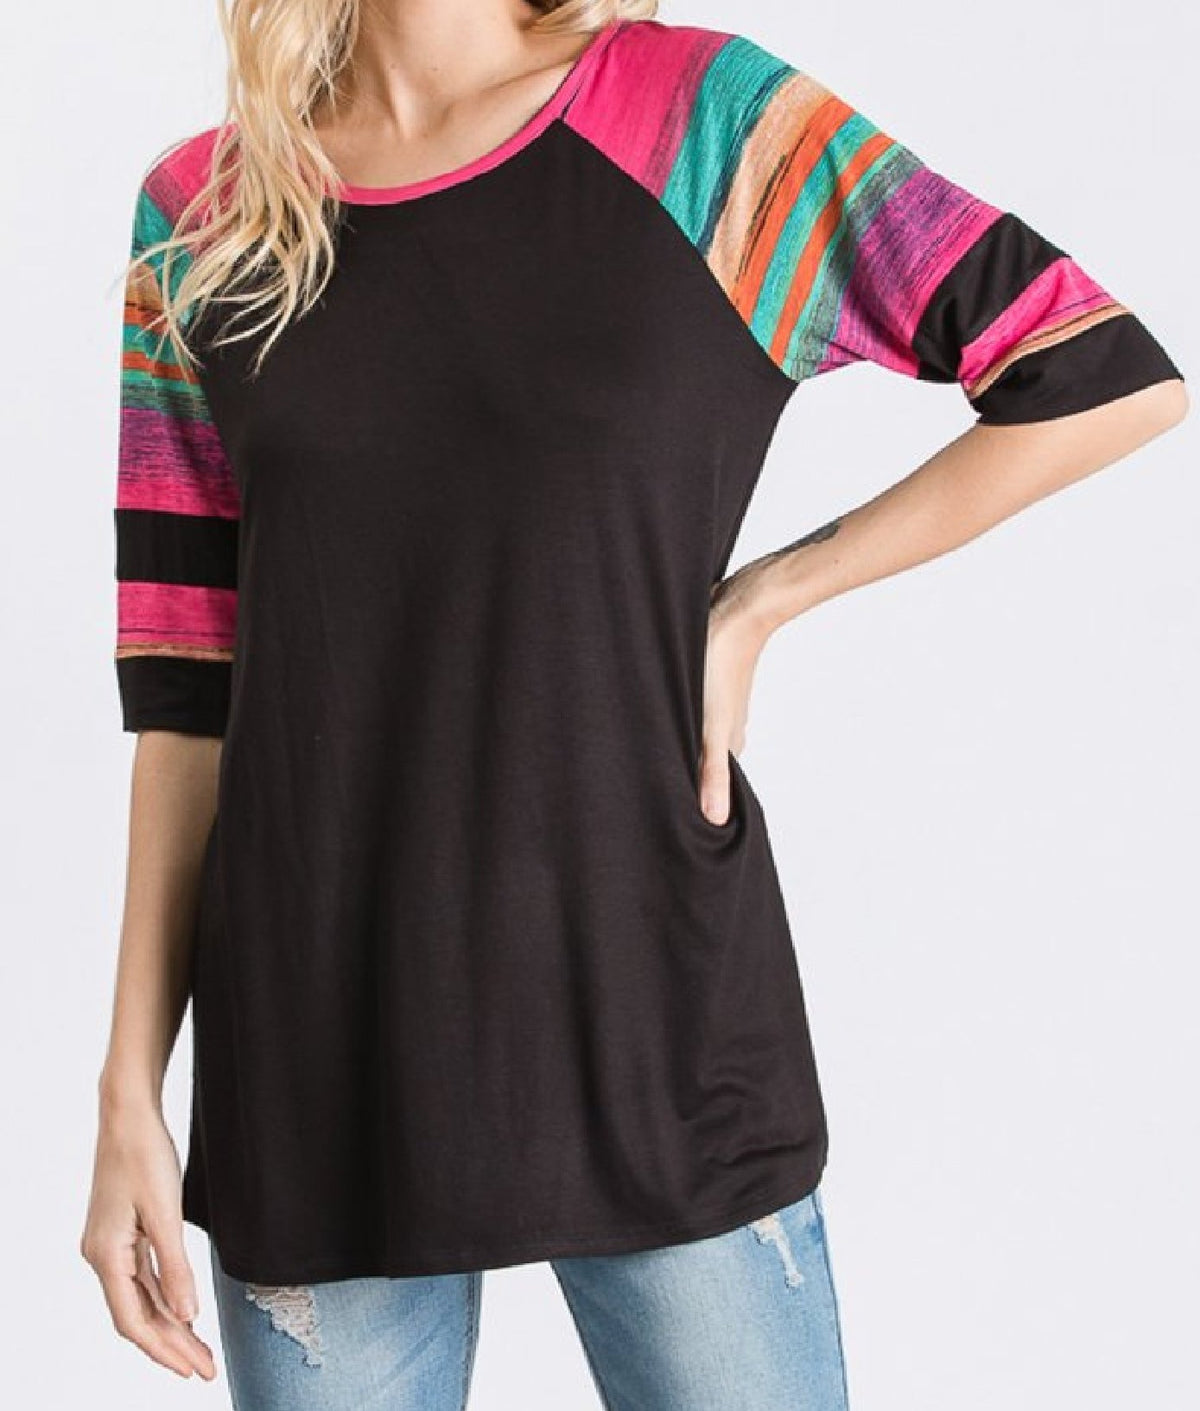 Tunic Multicolor Top with Striped Half Sleeves